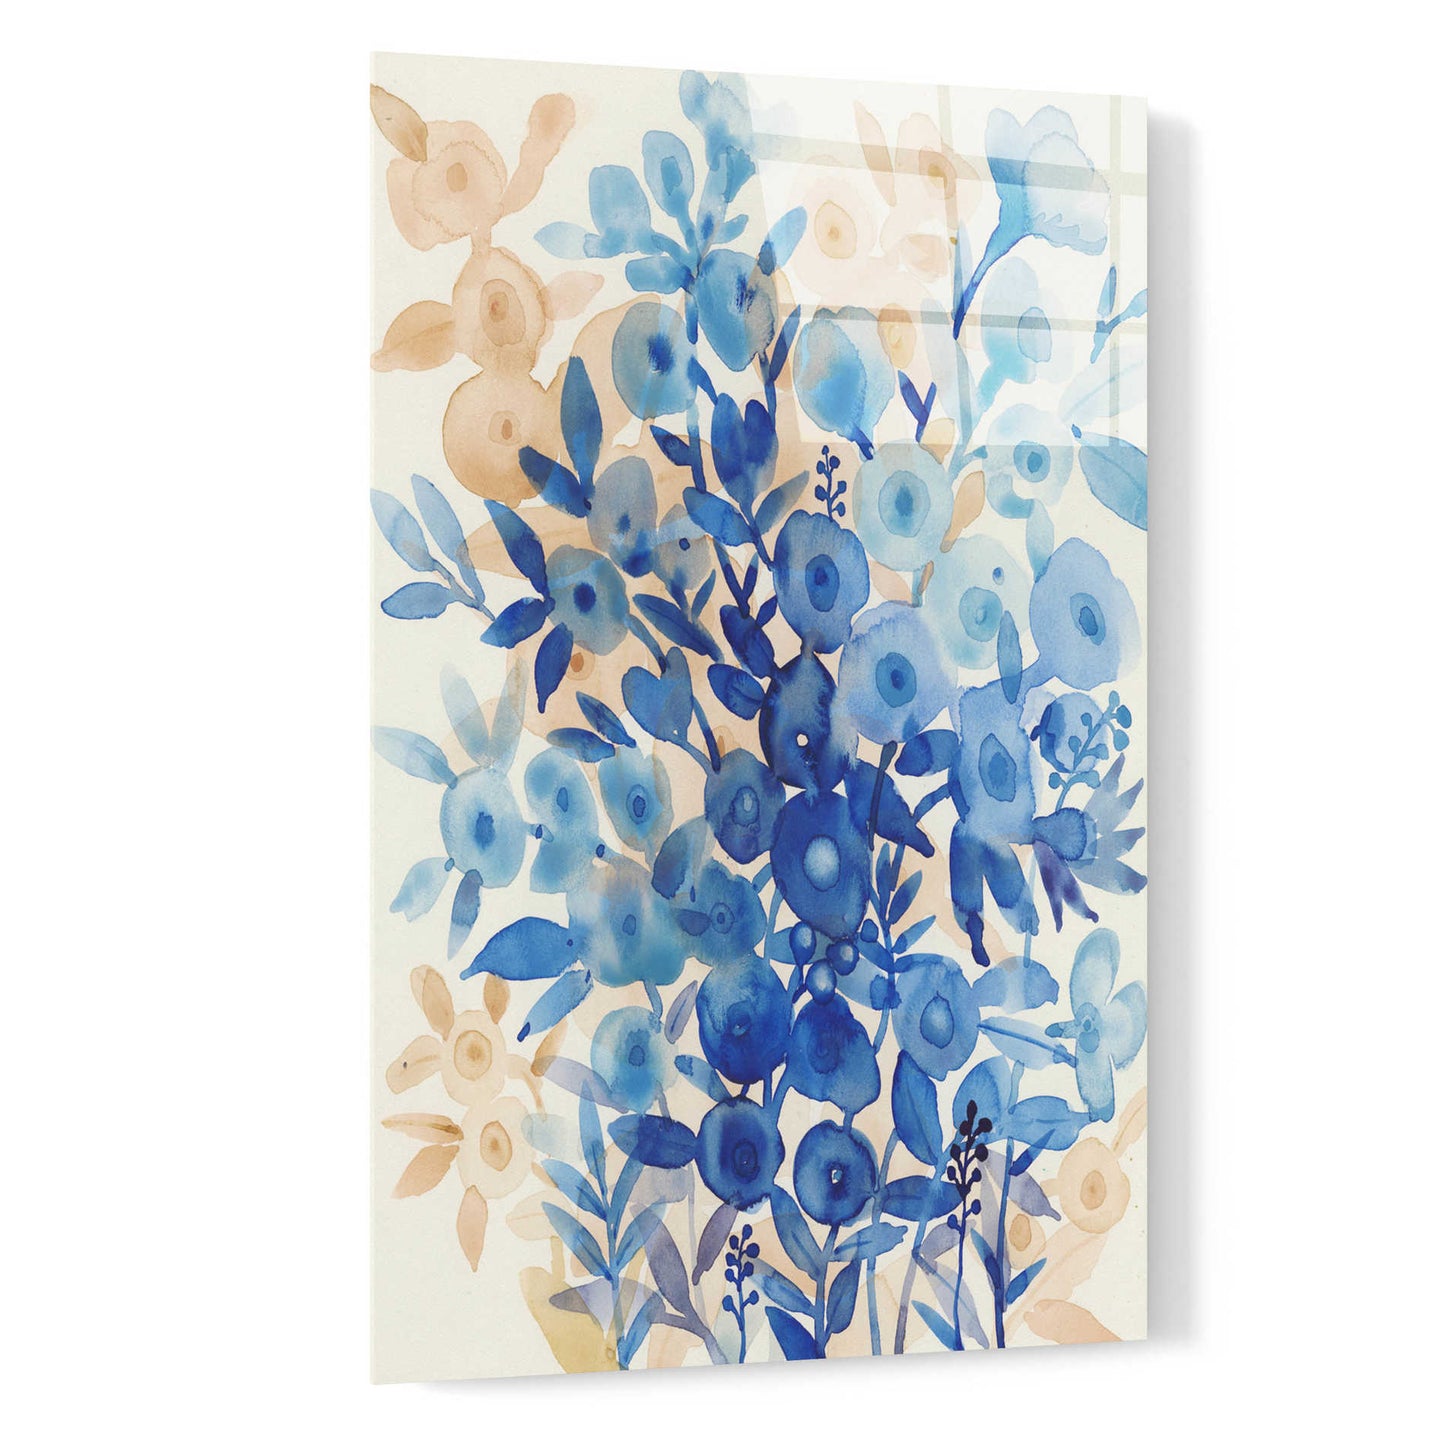 Epic Art 'Blueberry Floral II' by Tim O'Toole, Acrylic Glass Wall Art,16x24